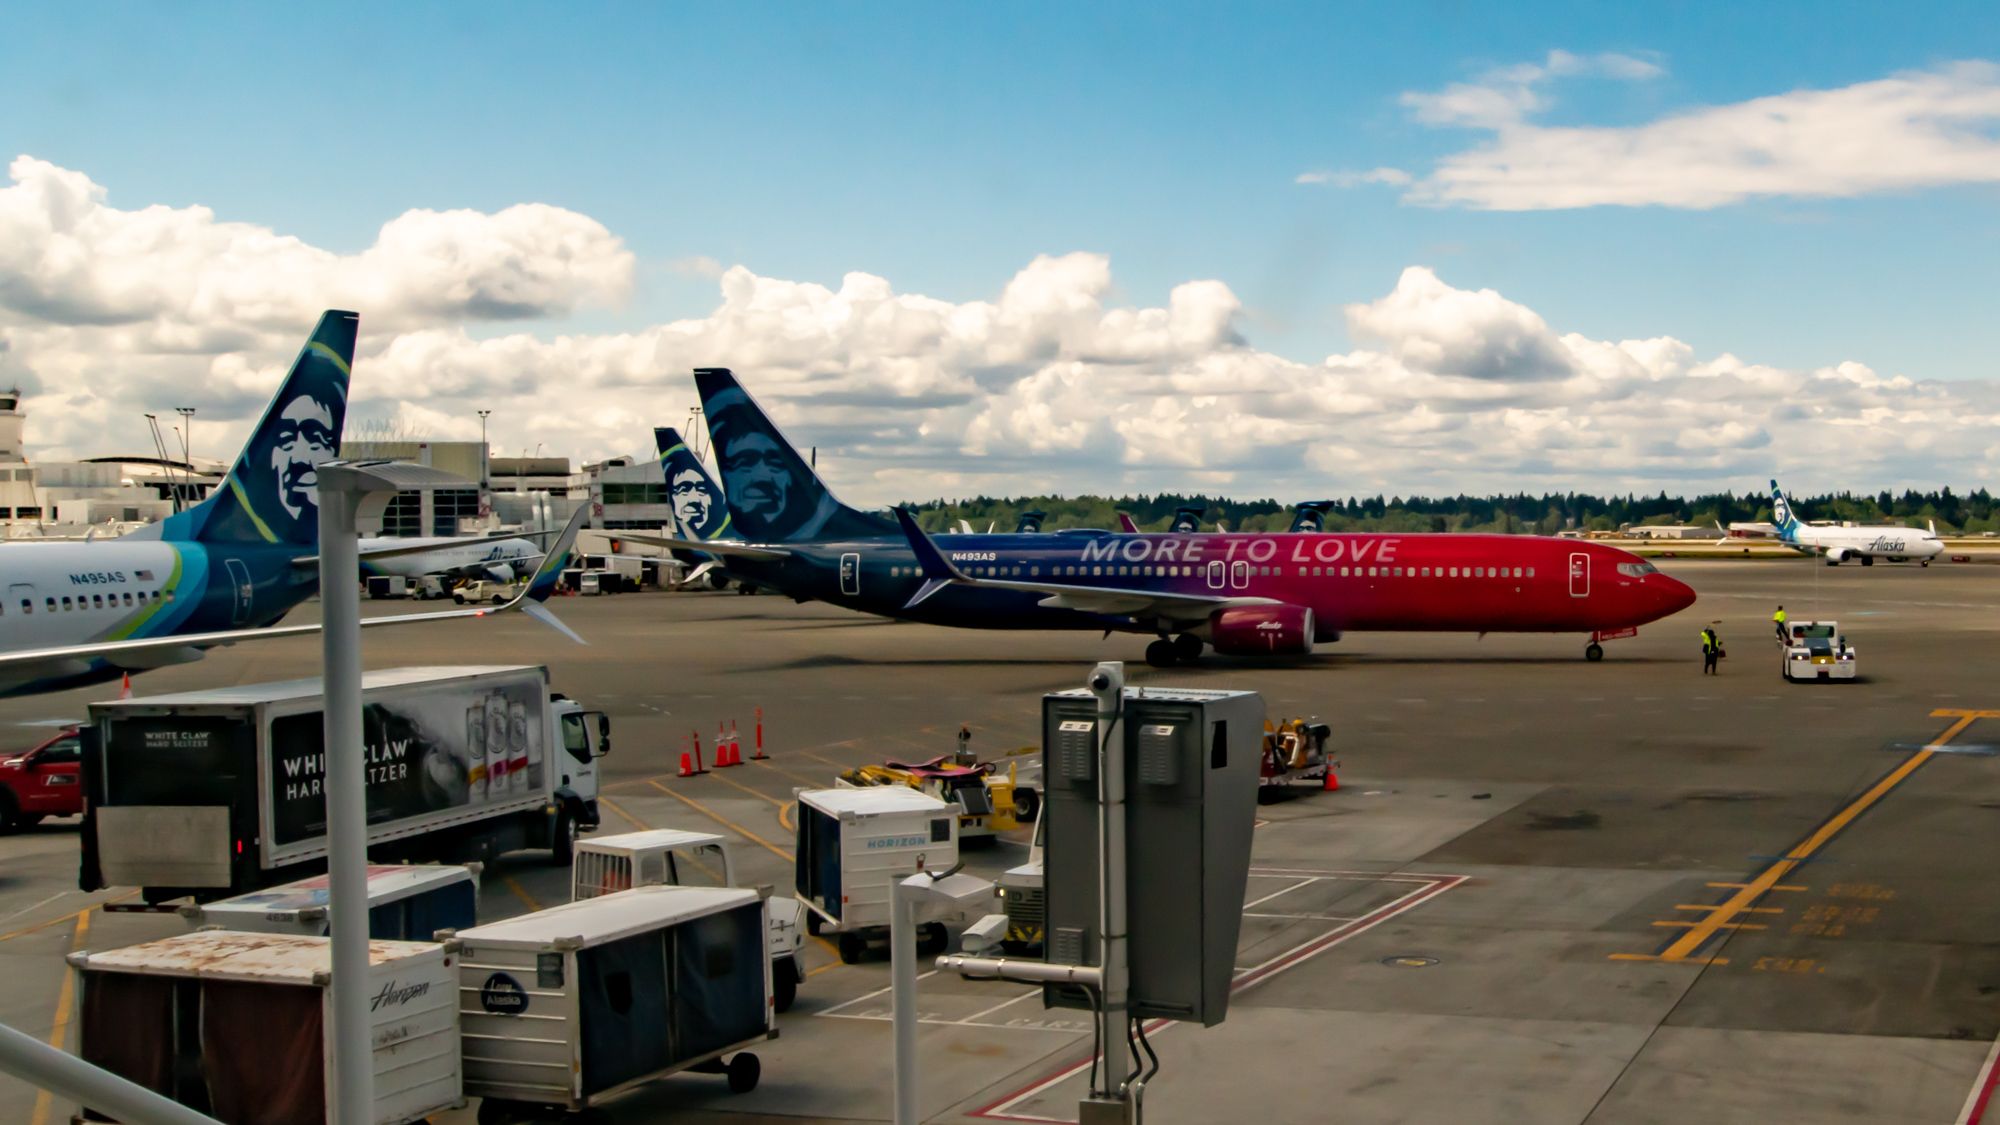 Busy Alaska Airlines Ground Ops at Seattle-Tacoma International Airport - Multiple 737s including the "Move to Love" special livery